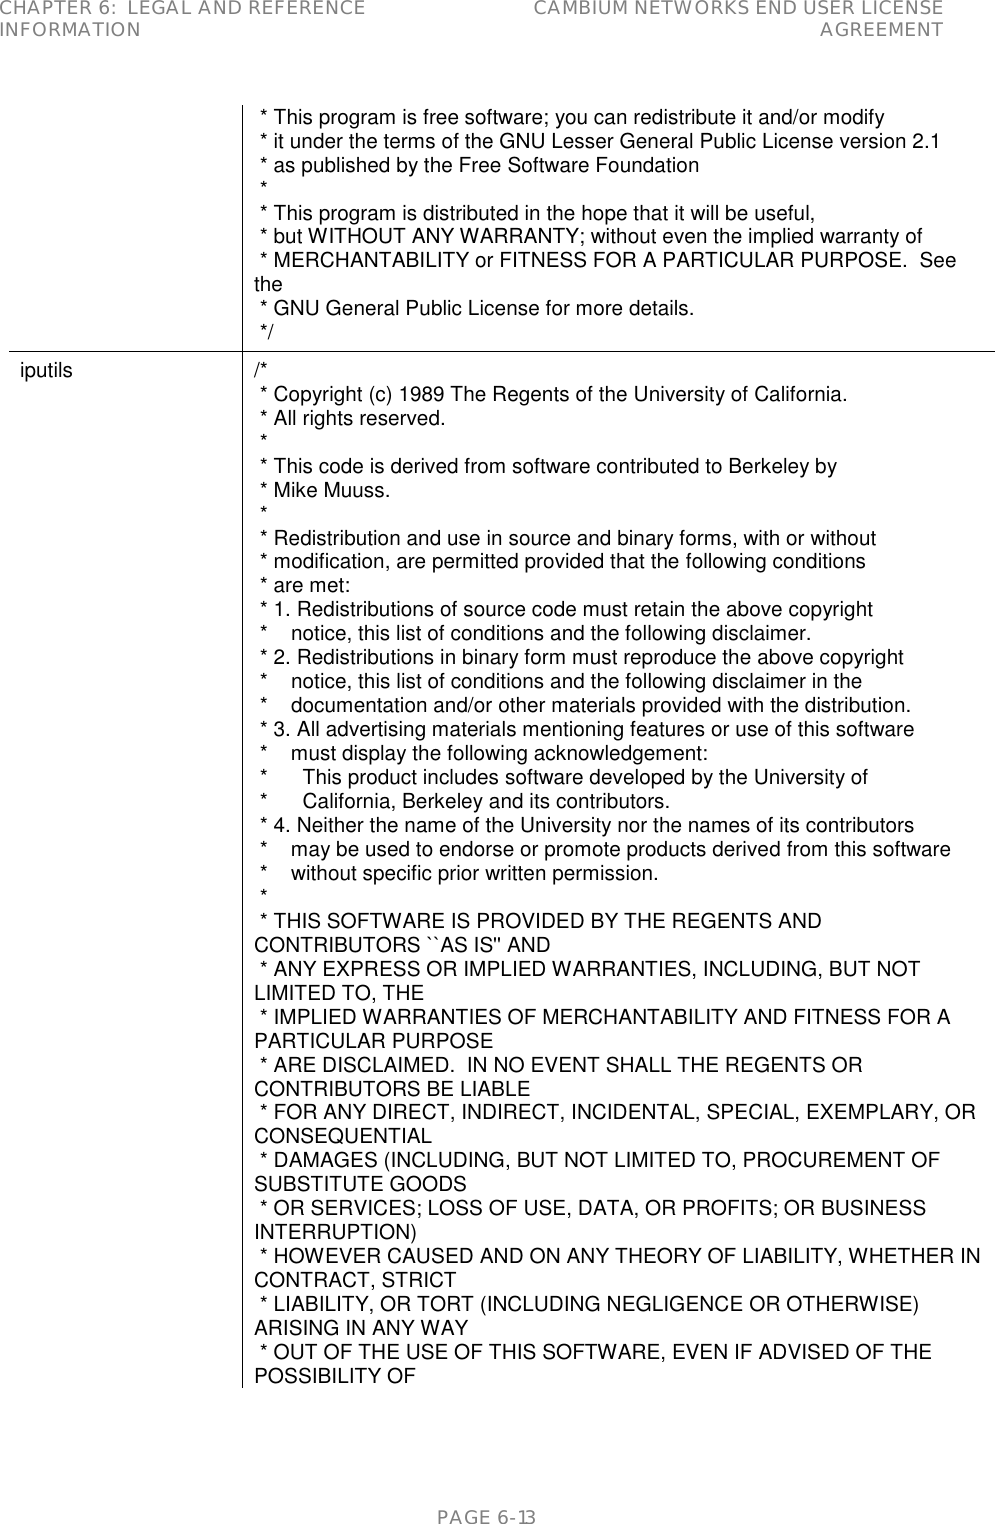 CHAPTER 6:  LEGAL AND REFERENCE INFORMATION CAMBIUM NETWORKS END USER LICENSE AGREEMENT   PAGE 6-13  * This program is free software; you can redistribute it and/or modify  * it under the terms of the GNU Lesser General Public License version 2.1  * as published by the Free Software Foundation  *  * This program is distributed in the hope that it will be useful,  * but WITHOUT ANY WARRANTY; without even the implied warranty of  * MERCHANTABILITY or FITNESS FOR A PARTICULAR PURPOSE.  See the  * GNU General Public License for more details.  */ iputils /*  * Copyright (c) 1989 The Regents of the University of California.  * All rights reserved.  *  * This code is derived from software contributed to Berkeley by  * Mike Muuss.  *  * Redistribution and use in source and binary forms, with or without  * modification, are permitted provided that the following conditions  * are met:  * 1. Redistributions of source code must retain the above copyright  *    notice, this list of conditions and the following disclaimer.  * 2. Redistributions in binary form must reproduce the above copyright  *    notice, this list of conditions and the following disclaimer in the  *    documentation and/or other materials provided with the distribution.  * 3. All advertising materials mentioning features or use of this software  *    must display the following acknowledgement:  *      This product includes software developed by the University of  *      California, Berkeley and its contributors.  * 4. Neither the name of the University nor the names of its contributors  *    may be used to endorse or promote products derived from this software  *    without specific prior written permission.  *  * THIS SOFTWARE IS PROVIDED BY THE REGENTS AND CONTRIBUTORS ``AS IS&apos;&apos; AND  * ANY EXPRESS OR IMPLIED WARRANTIES, INCLUDING, BUT NOT LIMITED TO, THE  * IMPLIED WARRANTIES OF MERCHANTABILITY AND FITNESS FOR A PARTICULAR PURPOSE  * ARE DISCLAIMED.  IN NO EVENT SHALL THE REGENTS OR CONTRIBUTORS BE LIABLE  * FOR ANY DIRECT, INDIRECT, INCIDENTAL, SPECIAL, EXEMPLARY, OR CONSEQUENTIAL  * DAMAGES (INCLUDING, BUT NOT LIMITED TO, PROCUREMENT OF SUBSTITUTE GOODS  * OR SERVICES; LOSS OF USE, DATA, OR PROFITS; OR BUSINESS INTERRUPTION)  * HOWEVER CAUSED AND ON ANY THEORY OF LIABILITY, WHETHER IN CONTRACT, STRICT  * LIABILITY, OR TORT (INCLUDING NEGLIGENCE OR OTHERWISE) ARISING IN ANY WAY  * OUT OF THE USE OF THIS SOFTWARE, EVEN IF ADVISED OF THE POSSIBILITY OF 